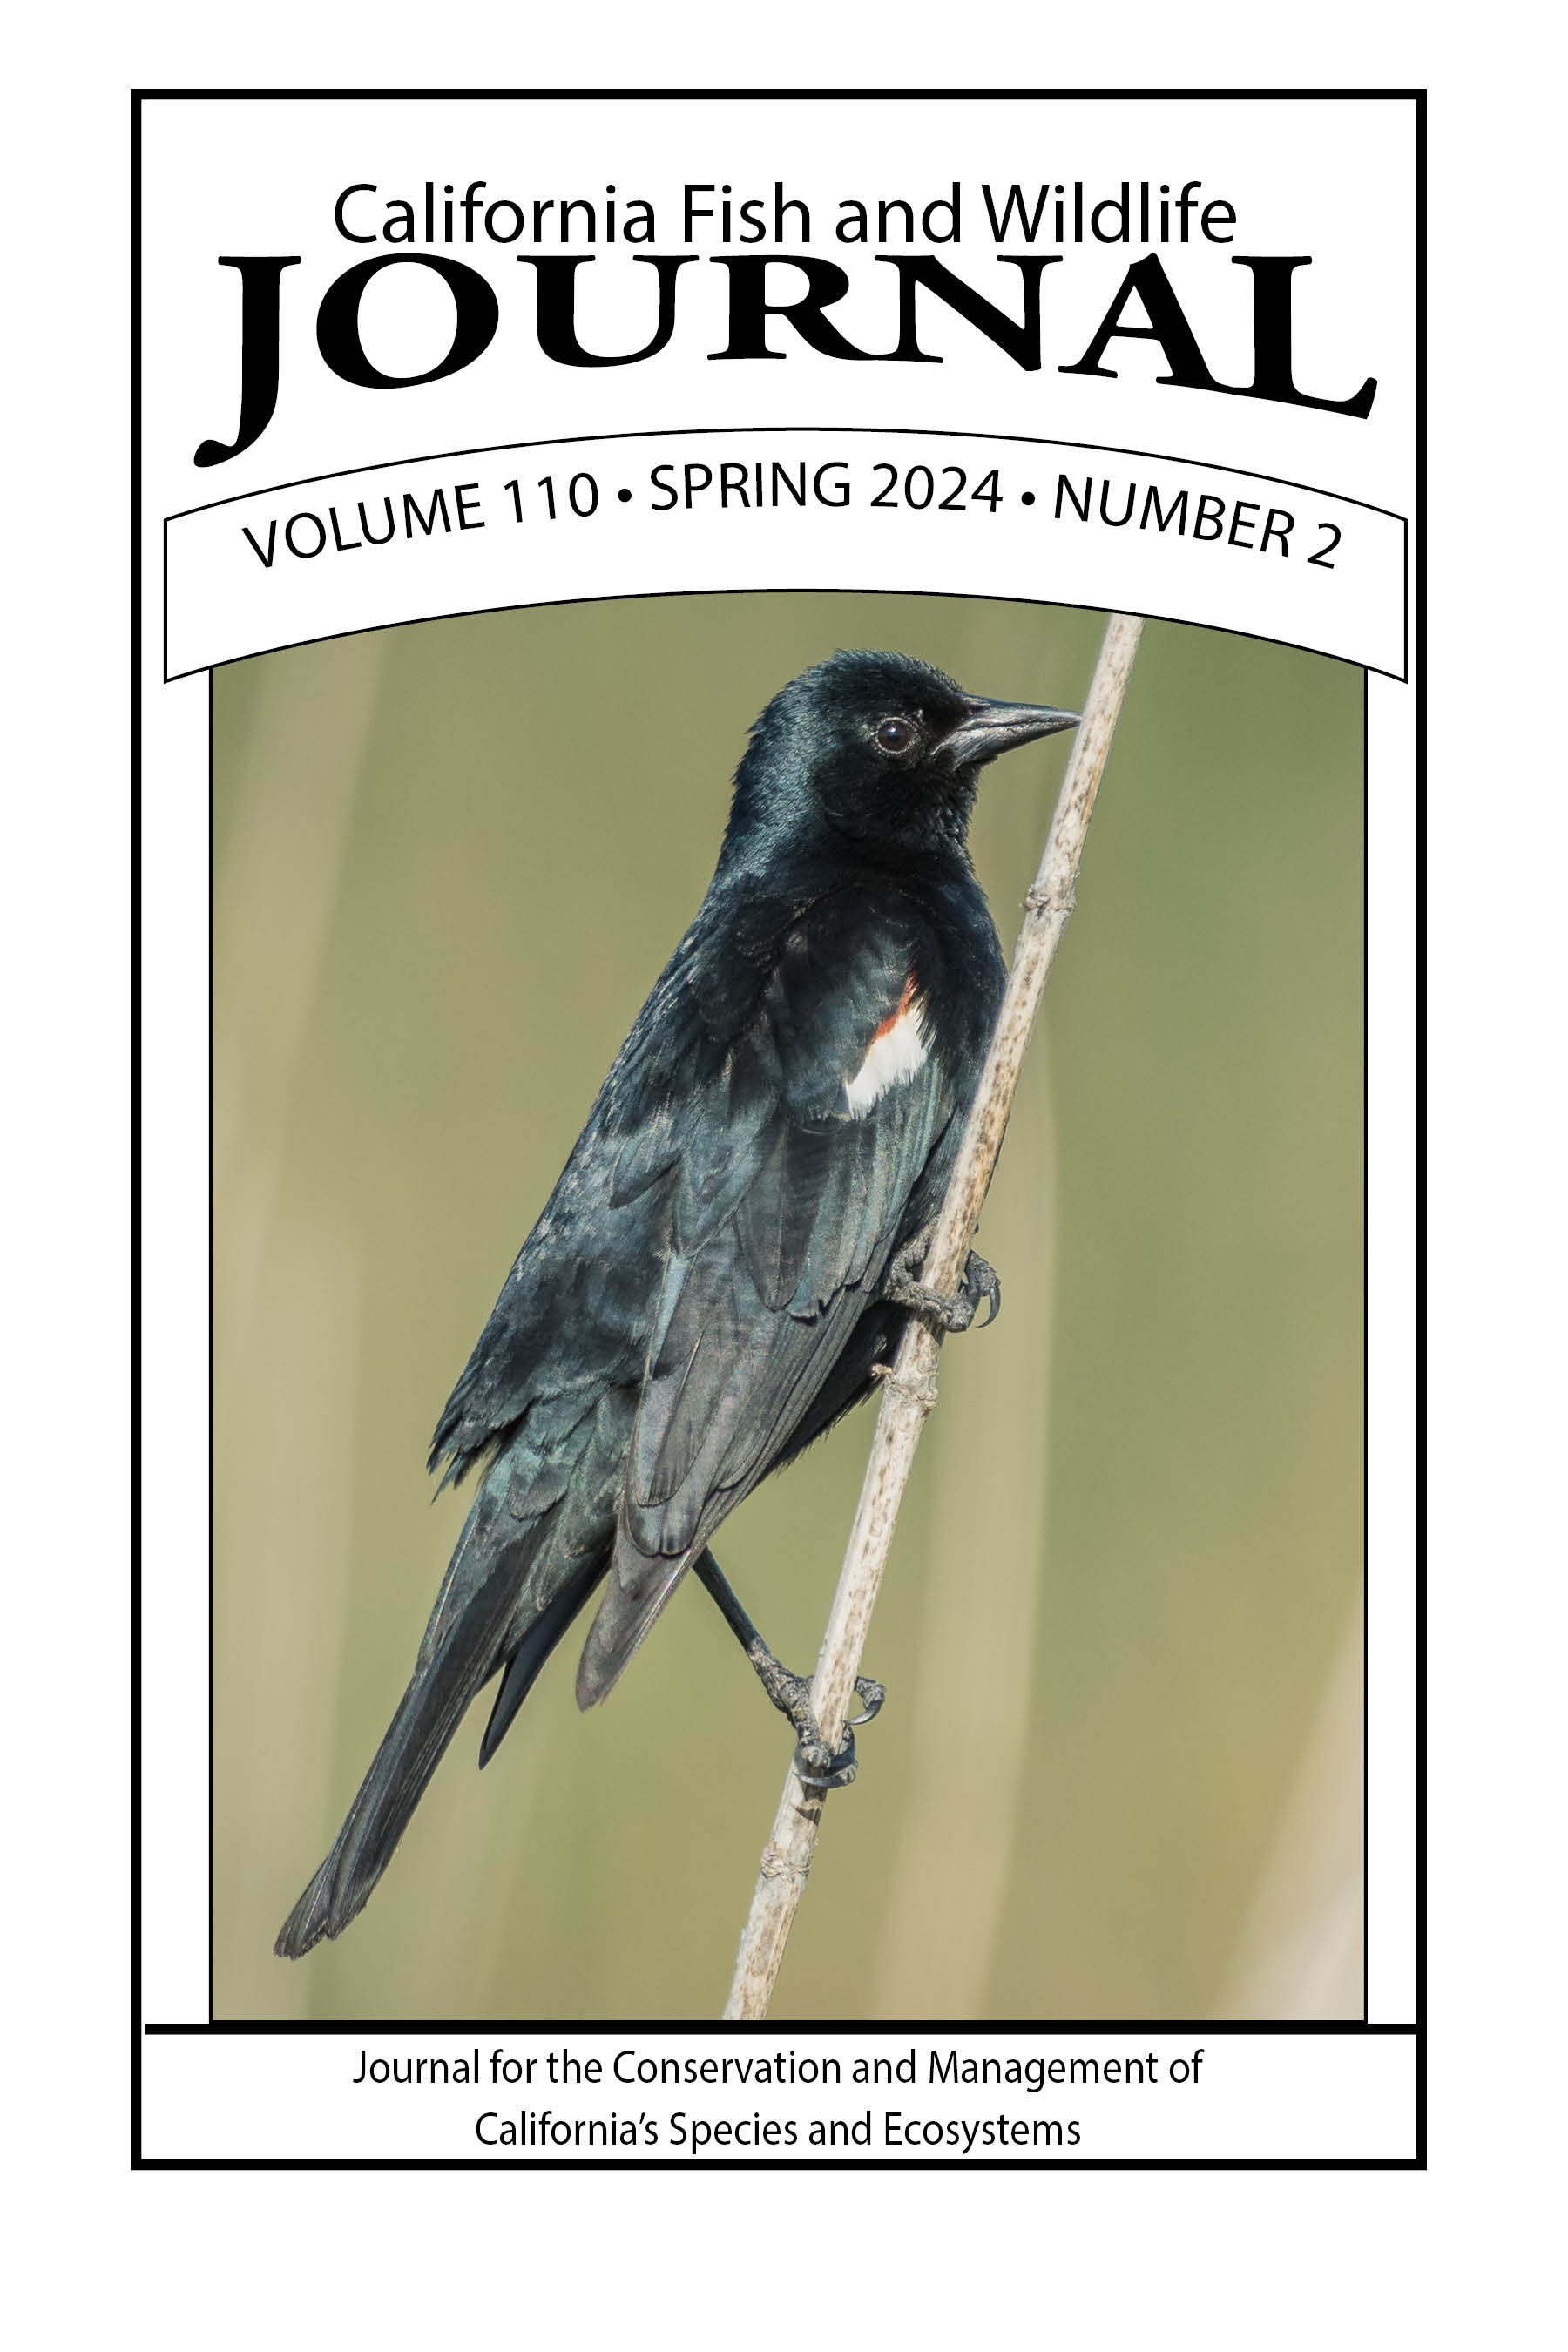 Cover of Issue 110(2) with a tricolored blackbird, a medium bird that is all black except for a small stripe of red and white on its wing